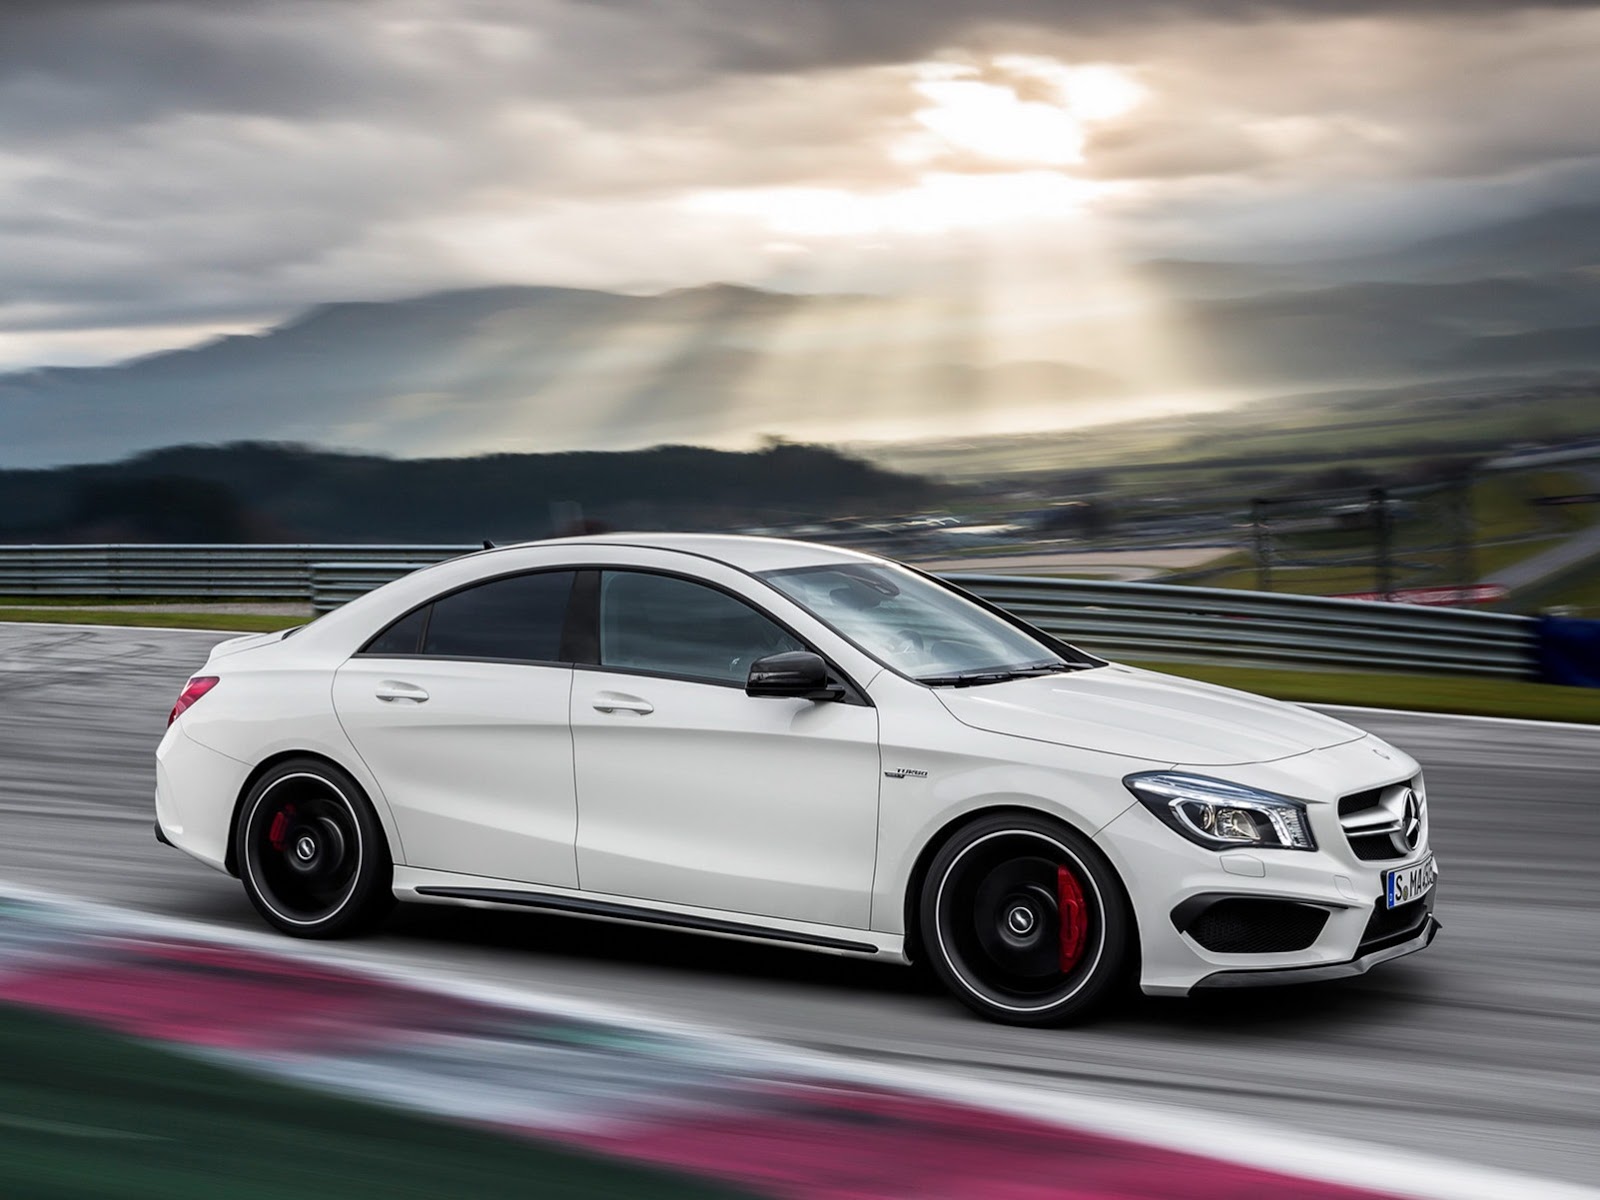 2014 Mercedes Cla 45 Amg First Photos Leaked Autoevolution